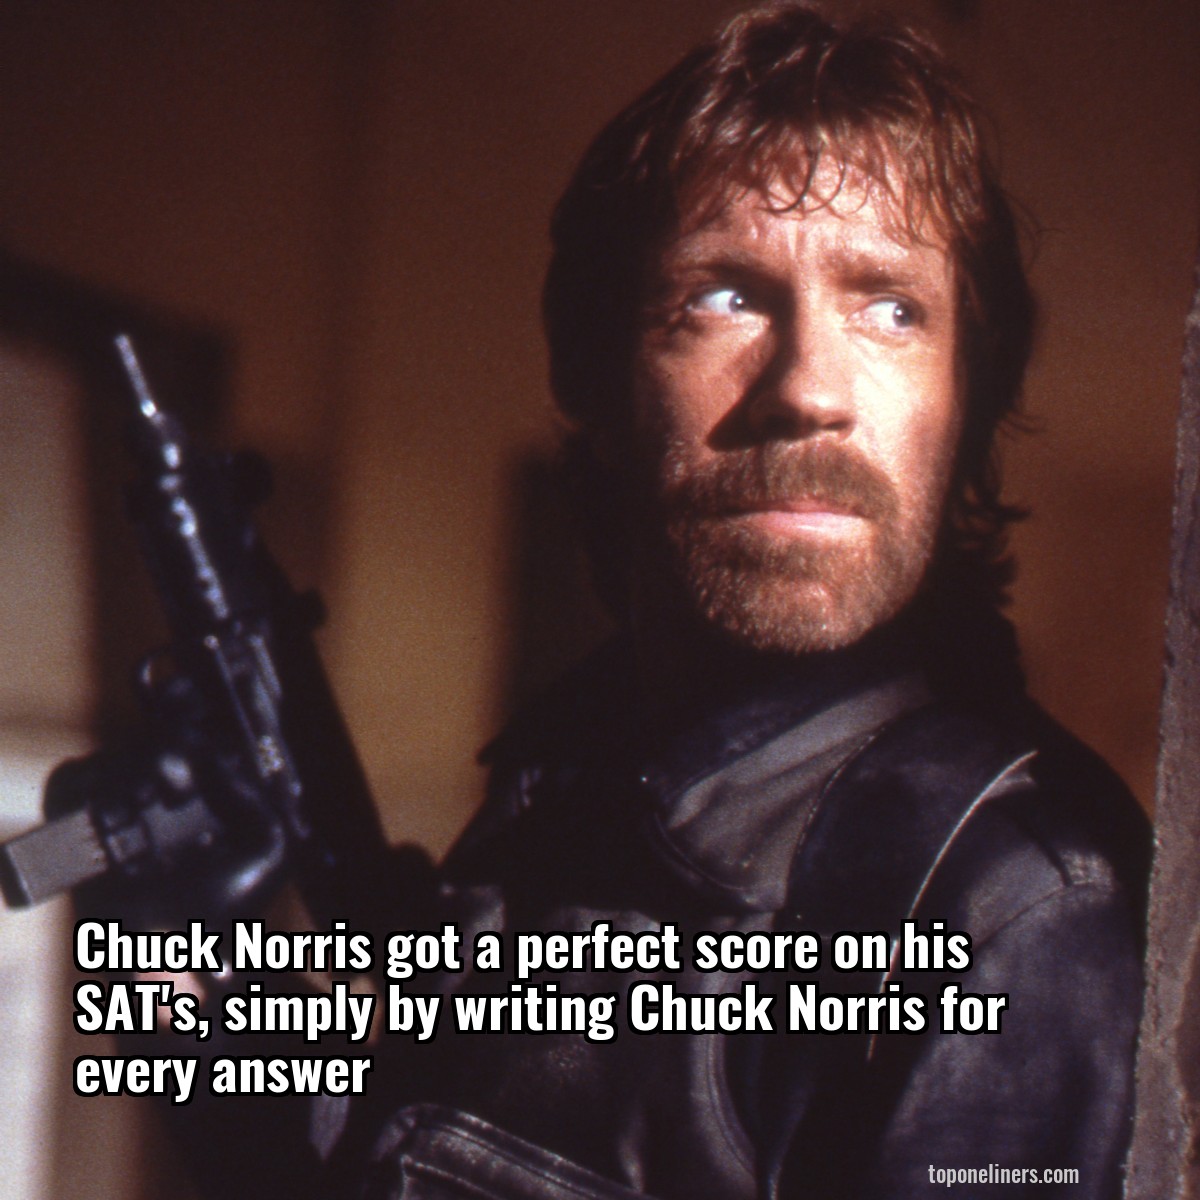 Chuck Norris got a perfect score on his SAT's, simply by writing Chuck Norris for every answer